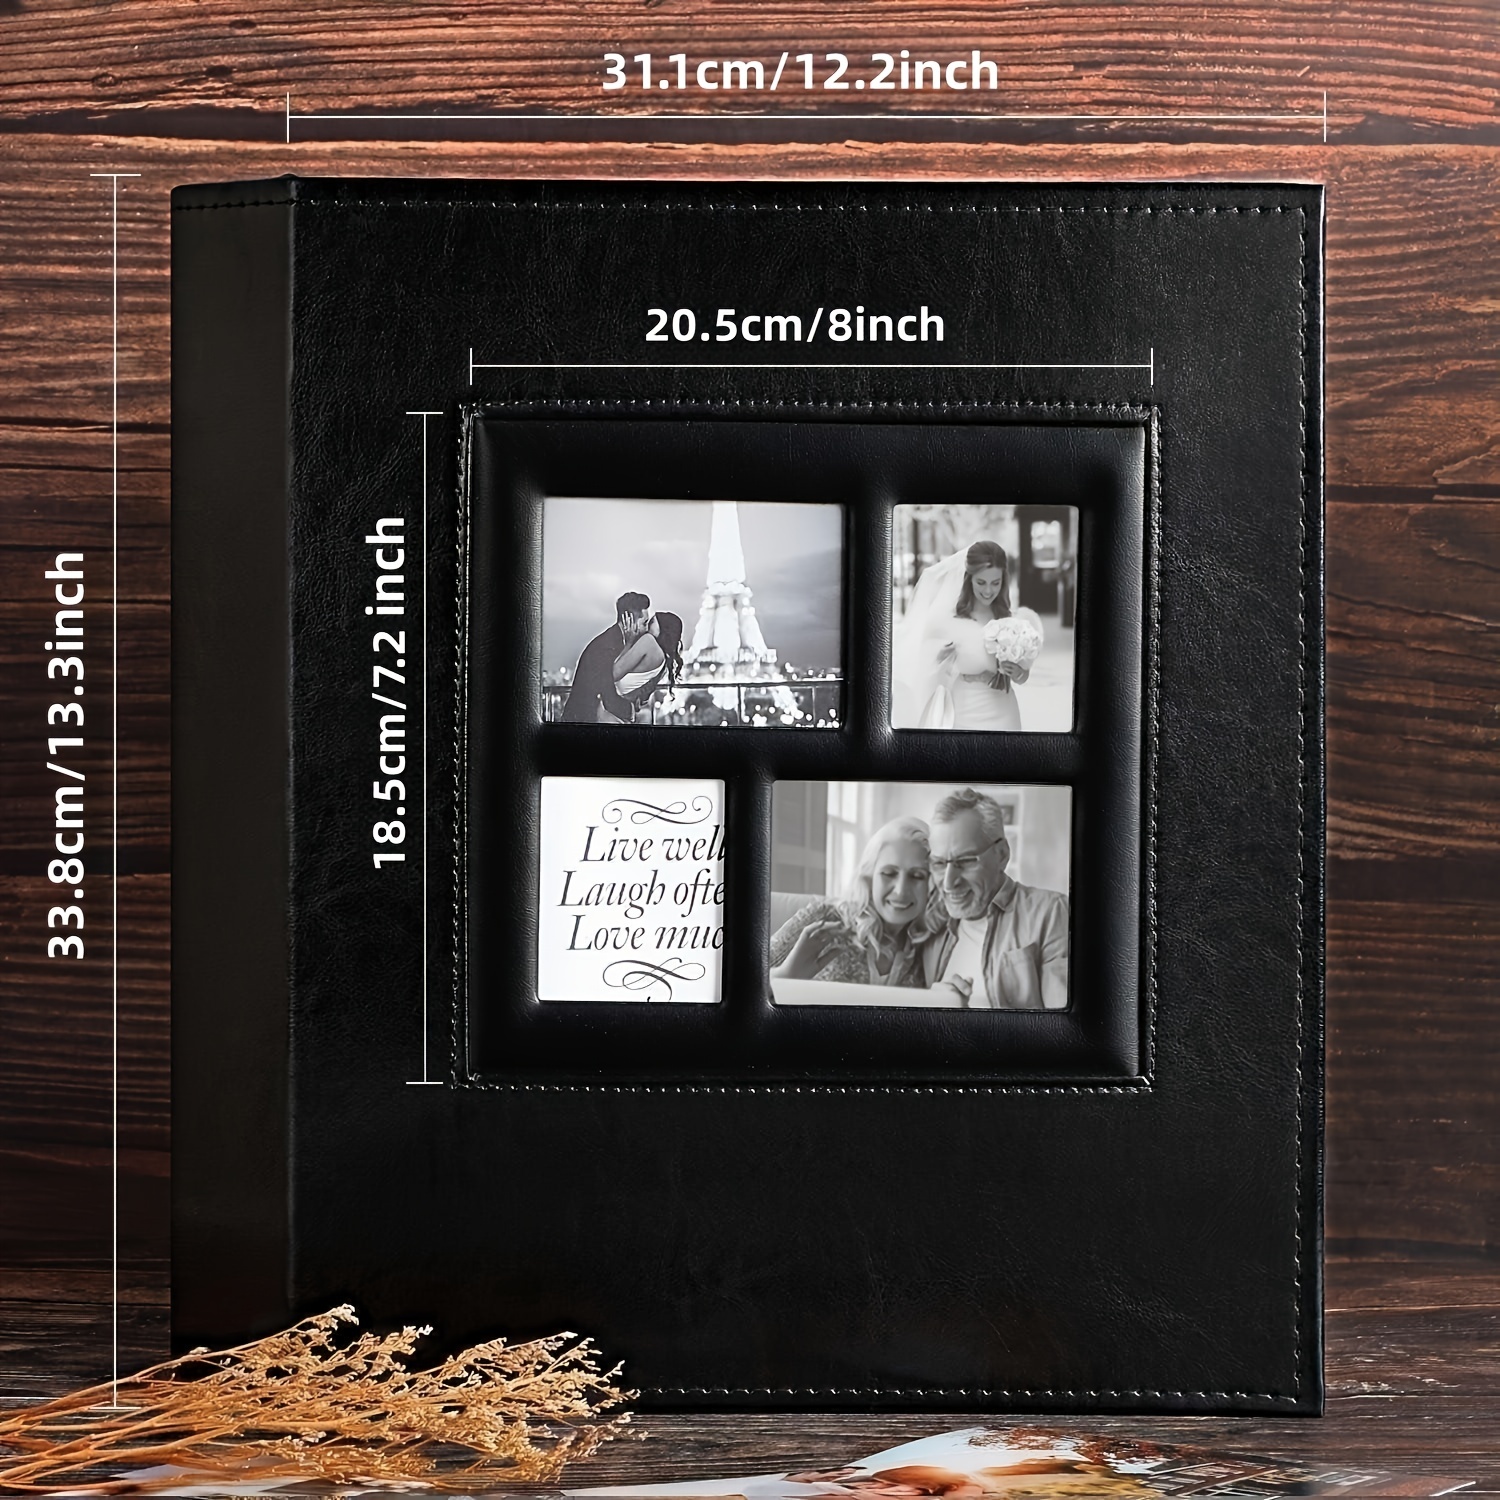 4x6 pocket photo albums from